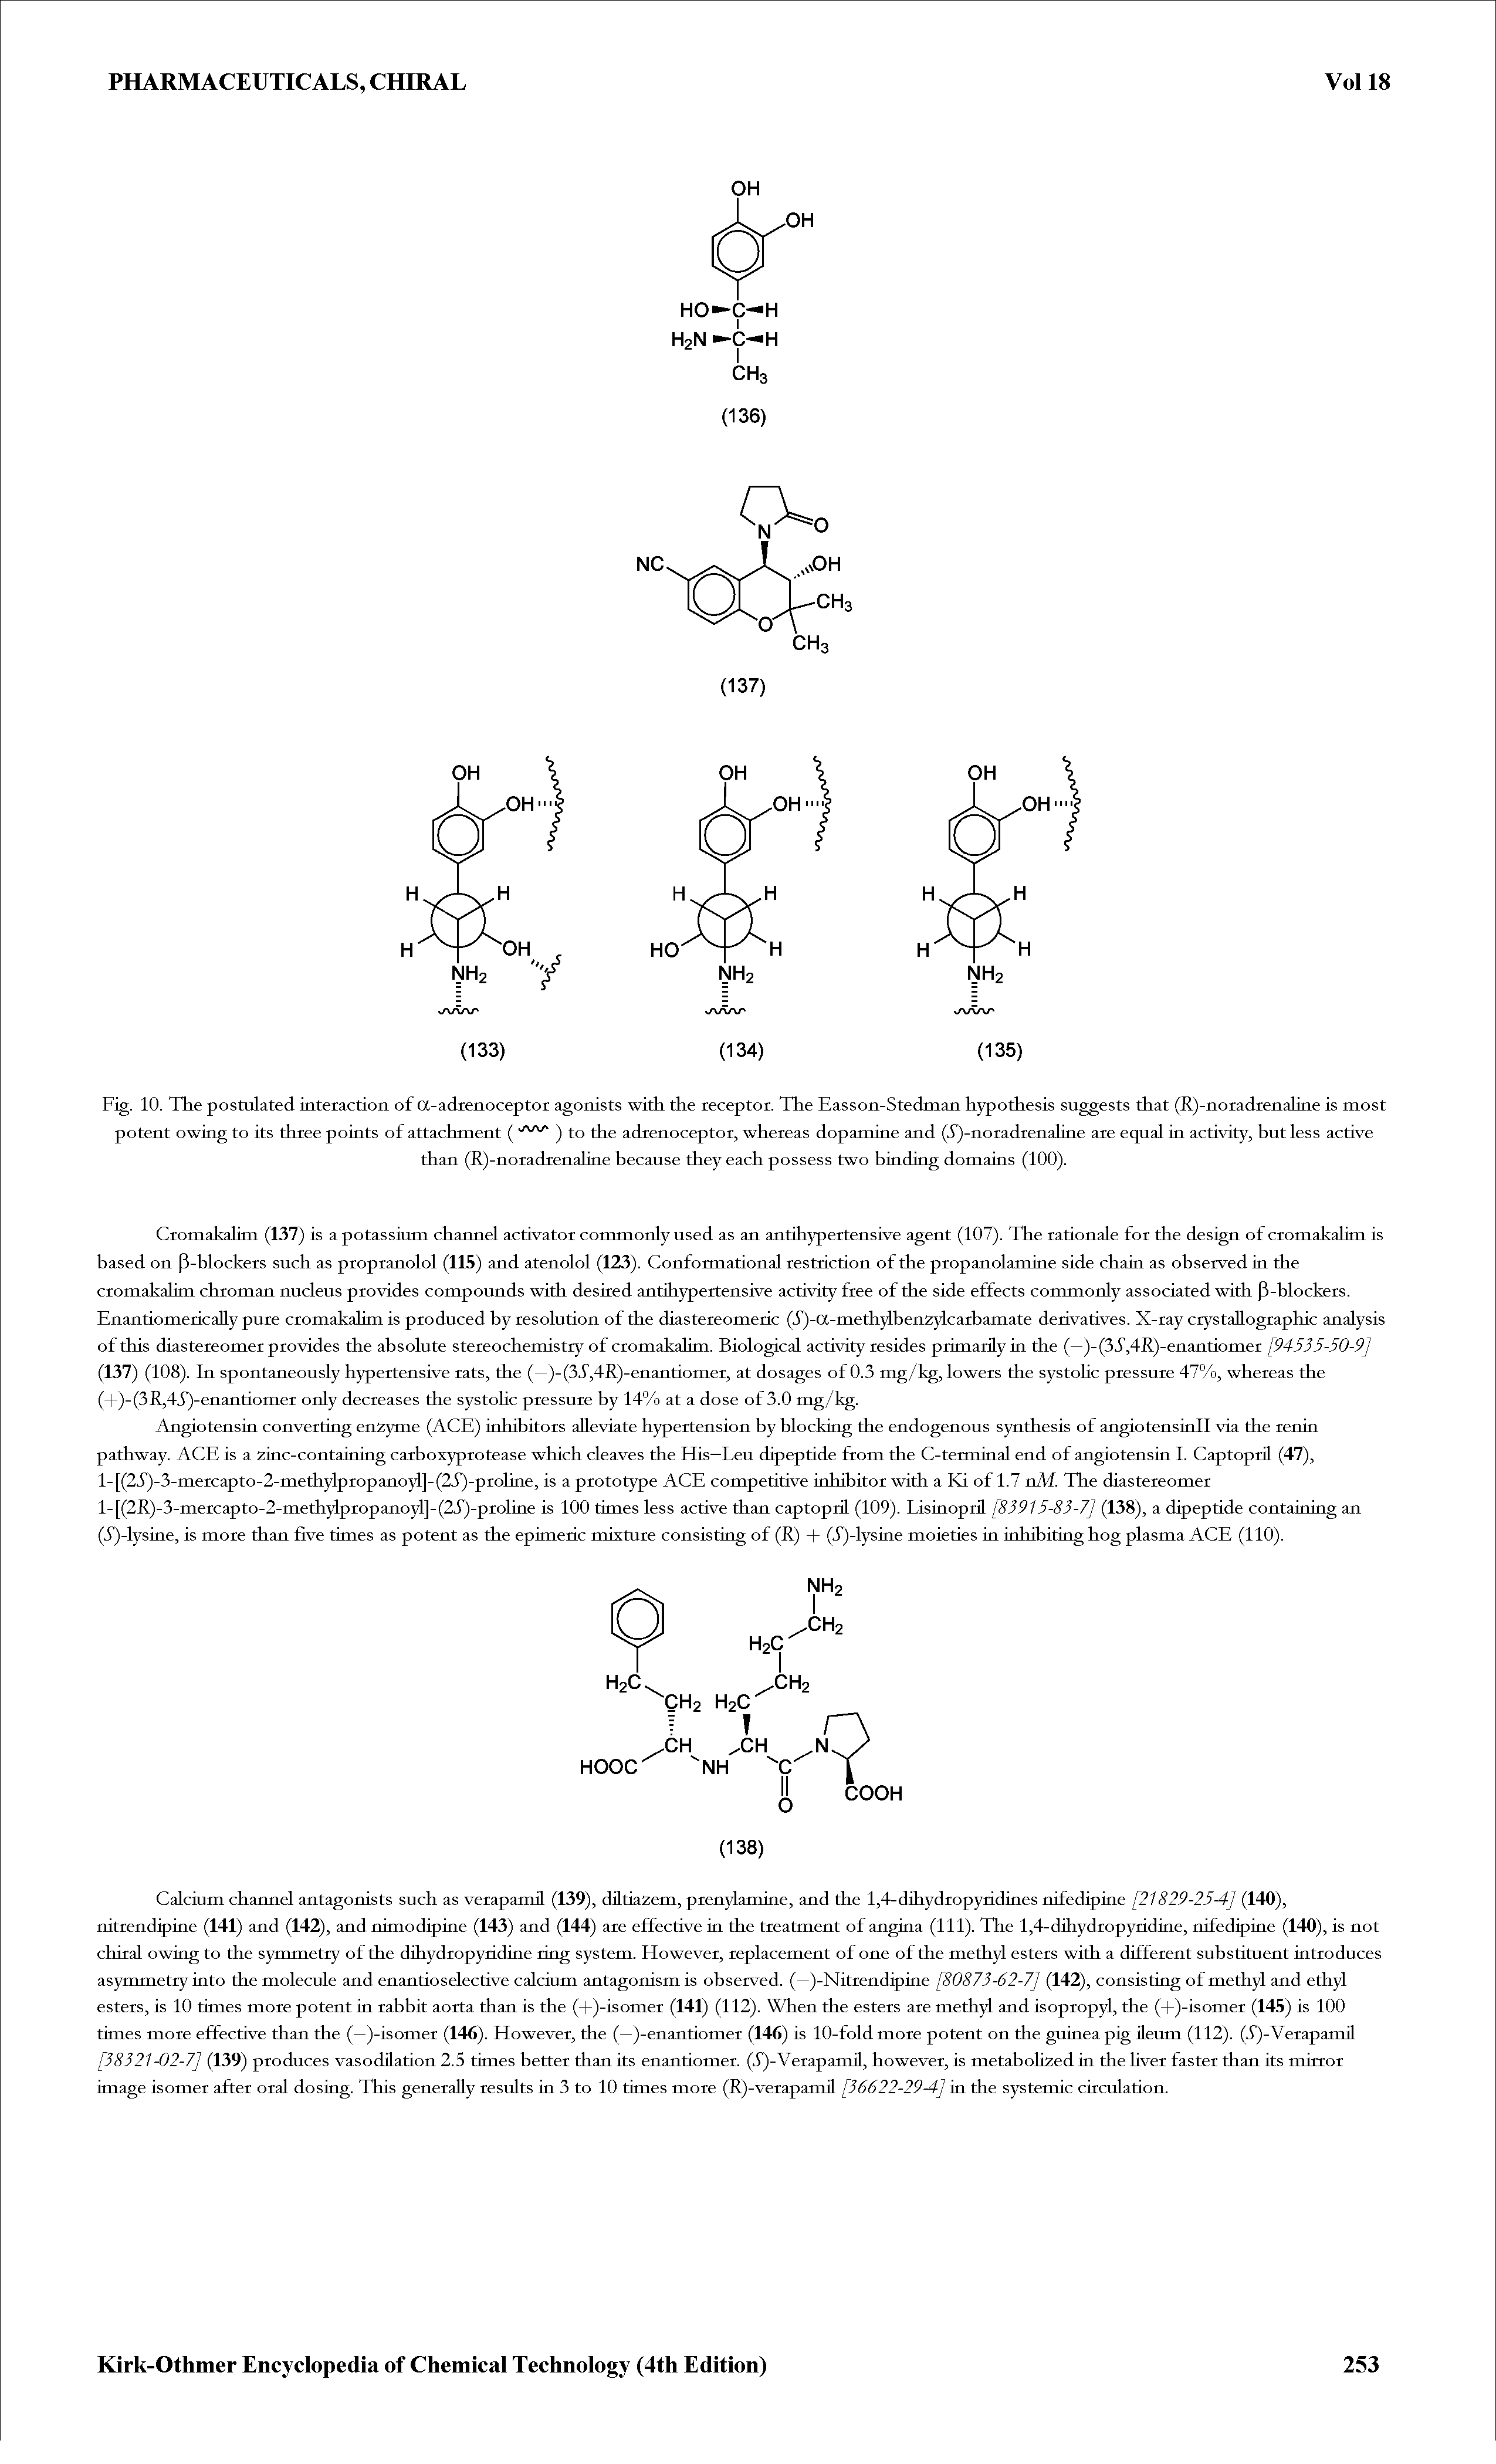 Fig. 10. The postulated interaction of a-adrenoceptor agonists with the receptor. The Easson-Stedman hypothesis suggests that (R)-noradrenaline is most potent owing to its three points of attachment () to the adrenoceptor, whereas dopamine and (5)-noradrenaline are equal in activity, but less active...